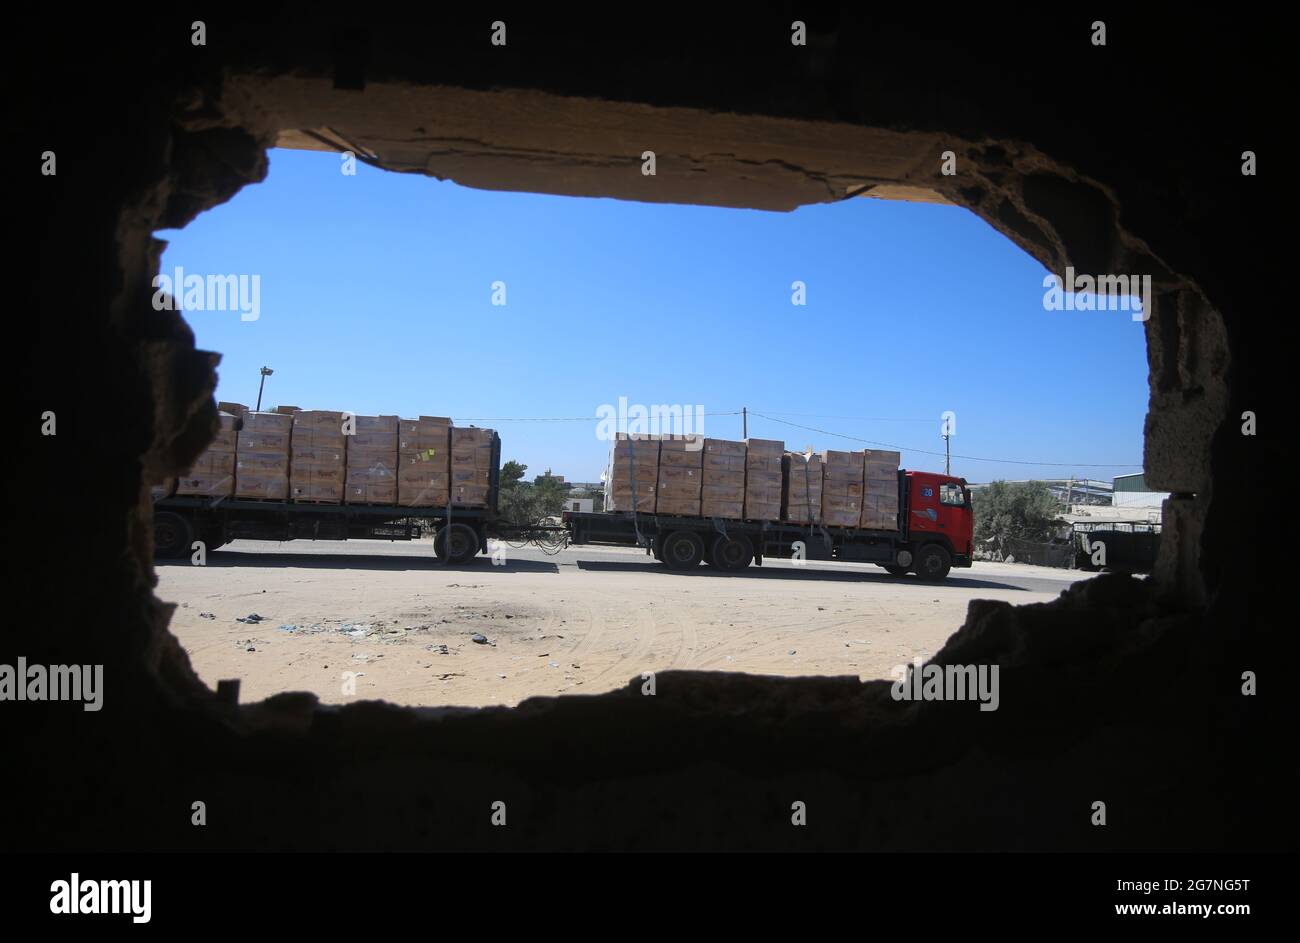 Rafah. 14th July, 2021. A loaded trailer truck arrives at the Kerem Shalom commercial crossing in the southern Gaza Strip city of Rafah, July 14, 2021. Israel on Monday decided to ease the tight restrictions imposed two months ago on export, import and fishing in the Gaza Strip, Palestinian officials said. The import of medical supplies and raw materials for industry and textiles will be allowed from Israel to Gaza through the commercial crossing of Kerem Shalom. Credit: Khaled Omar/Xinhua/Alamy Live News Stock Photo